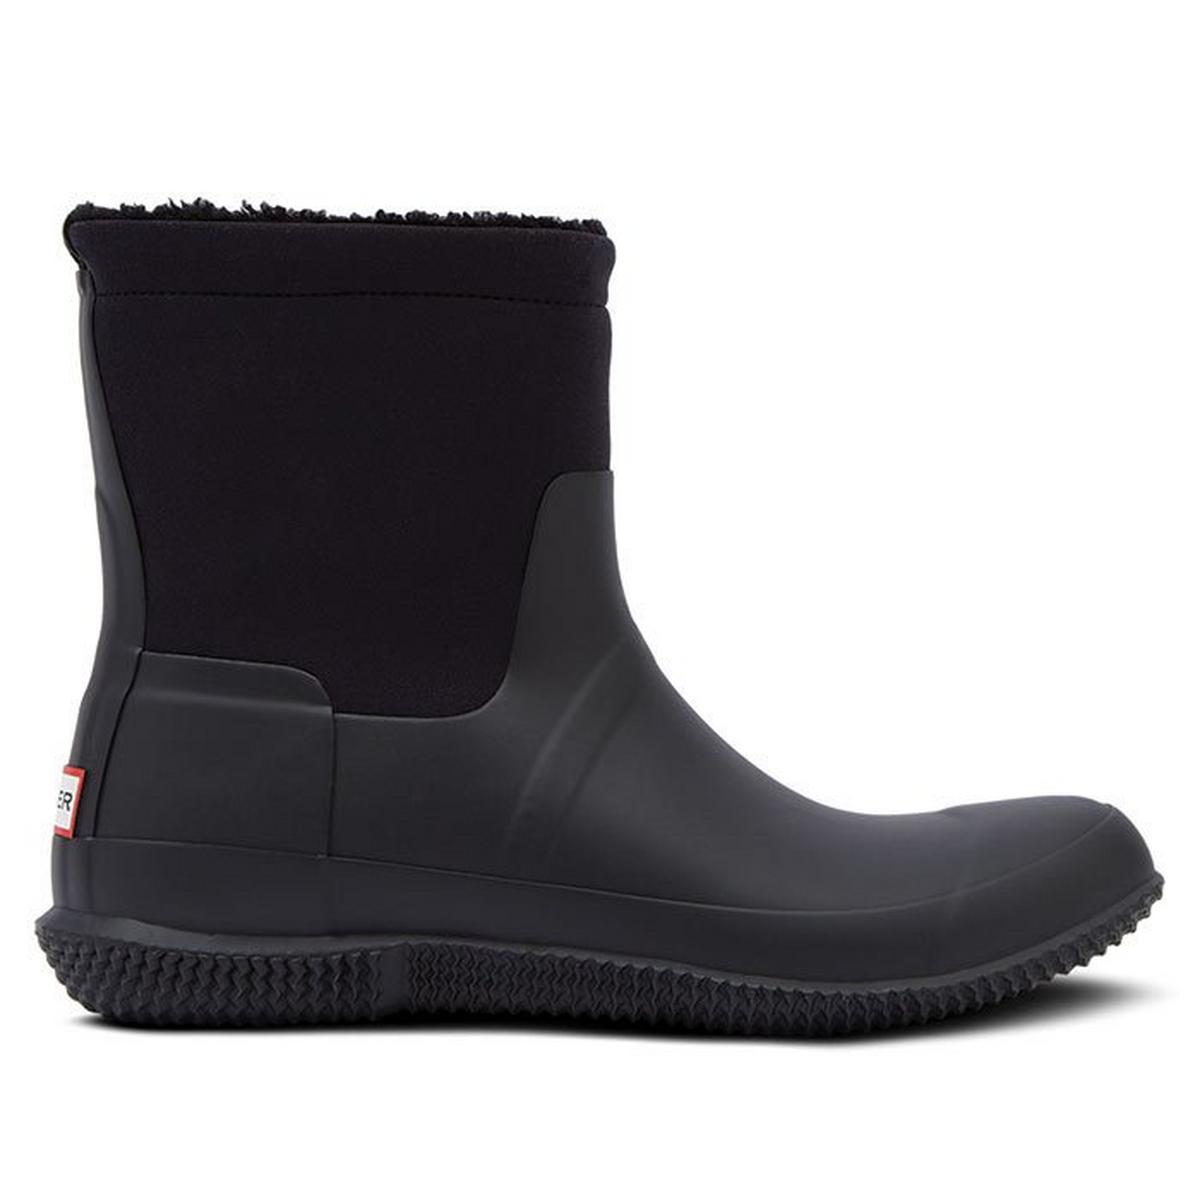 Bottes Insulated Roll Top Sherpa pour hommes